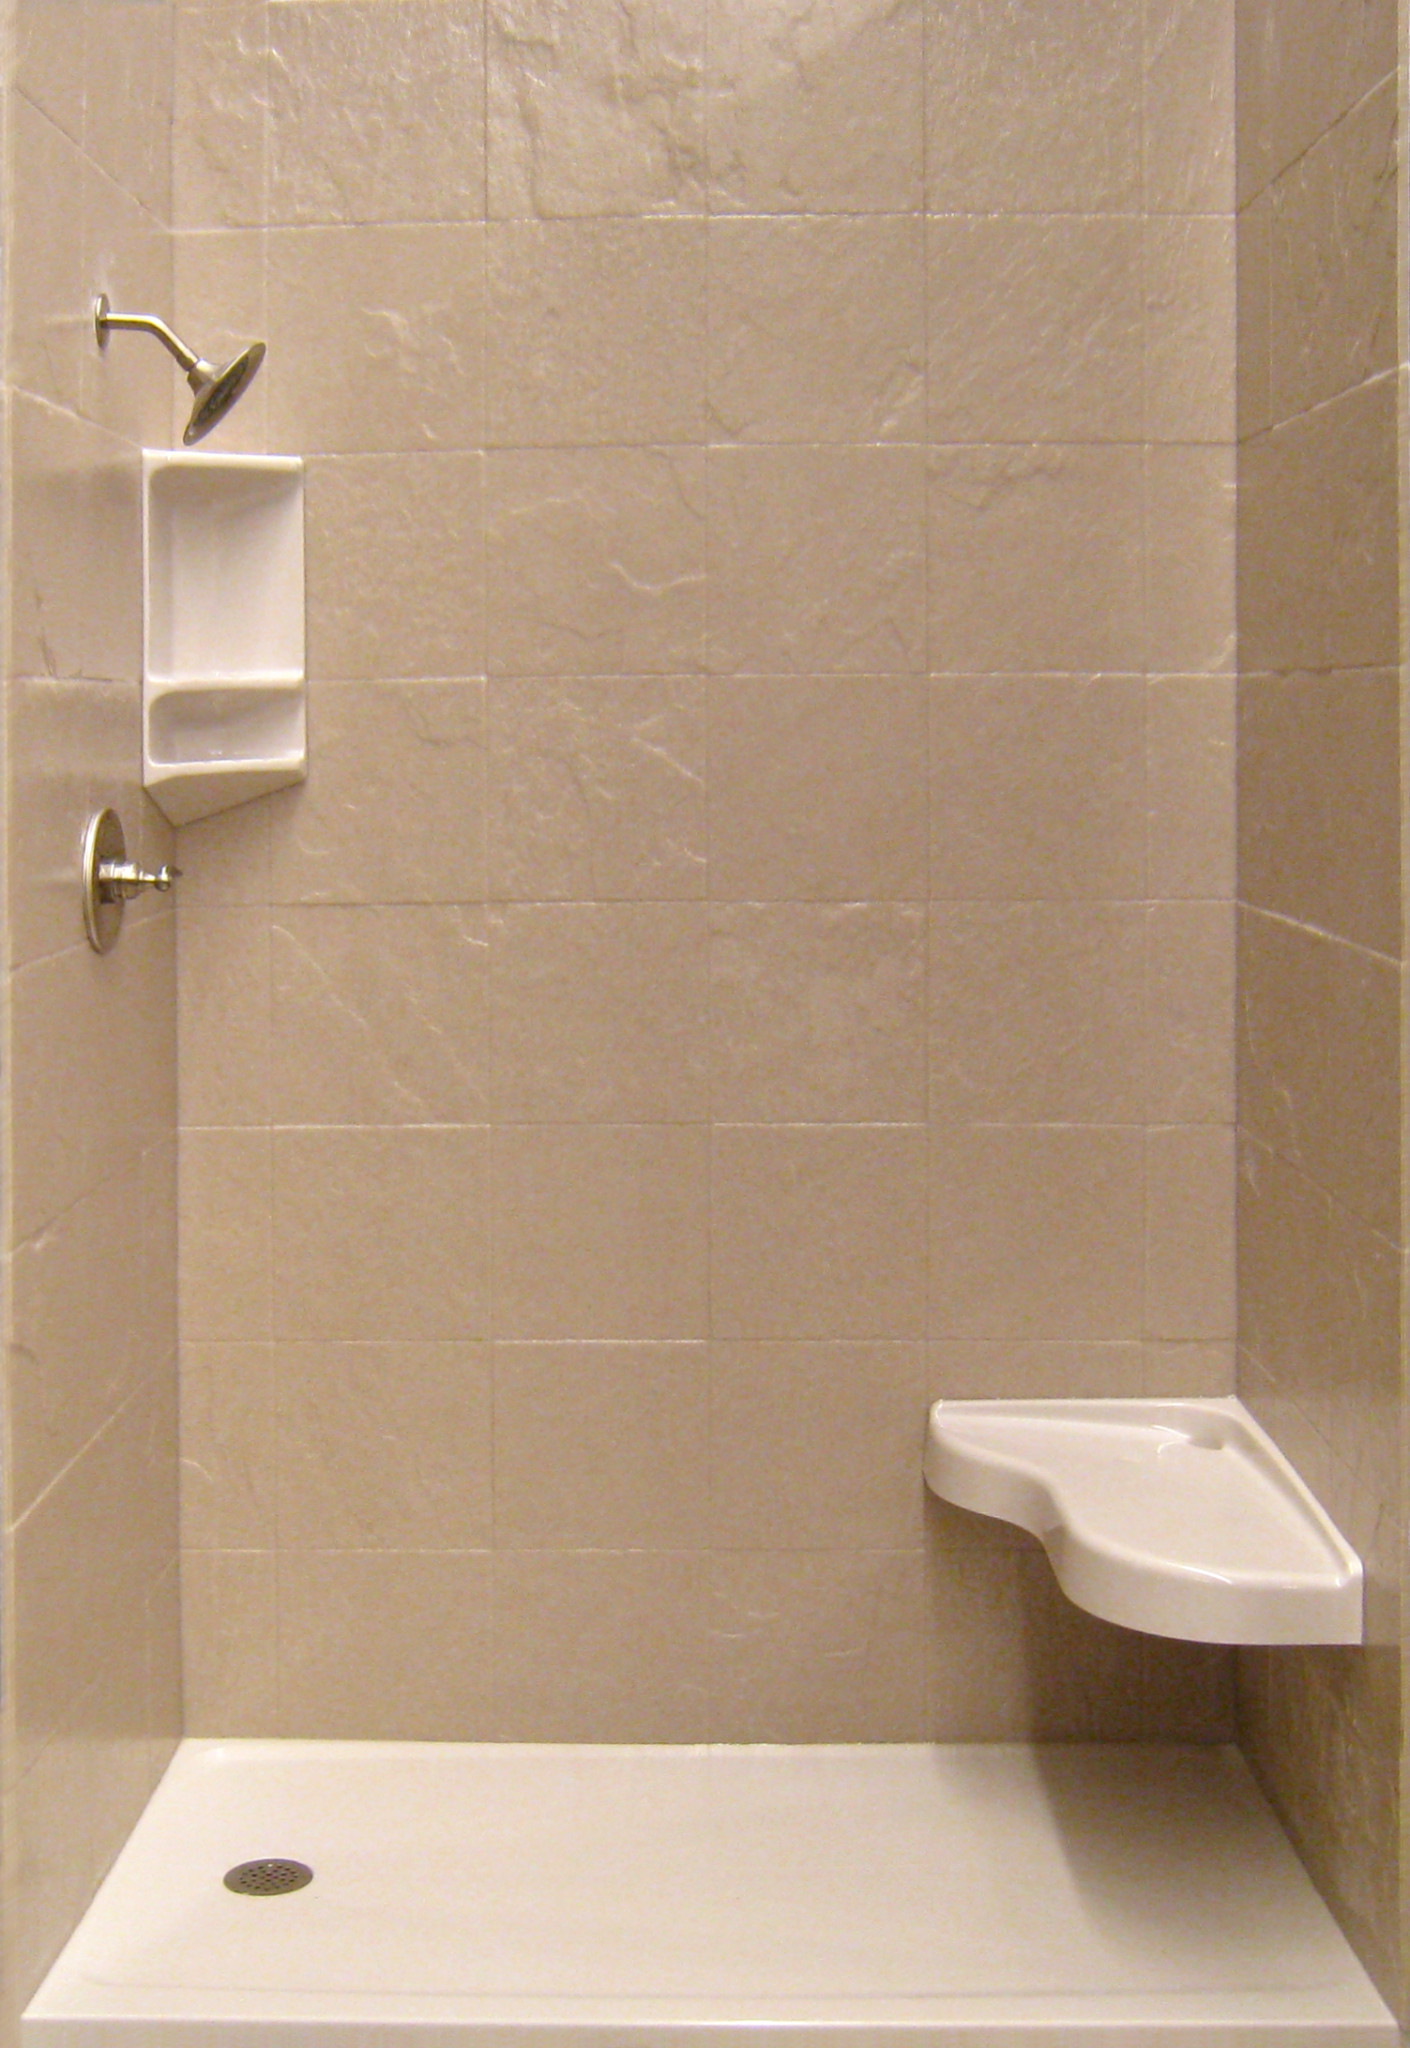 Onyx Bathroom Tile
 Bathroom Remodeling Building a Better Bathroom With the